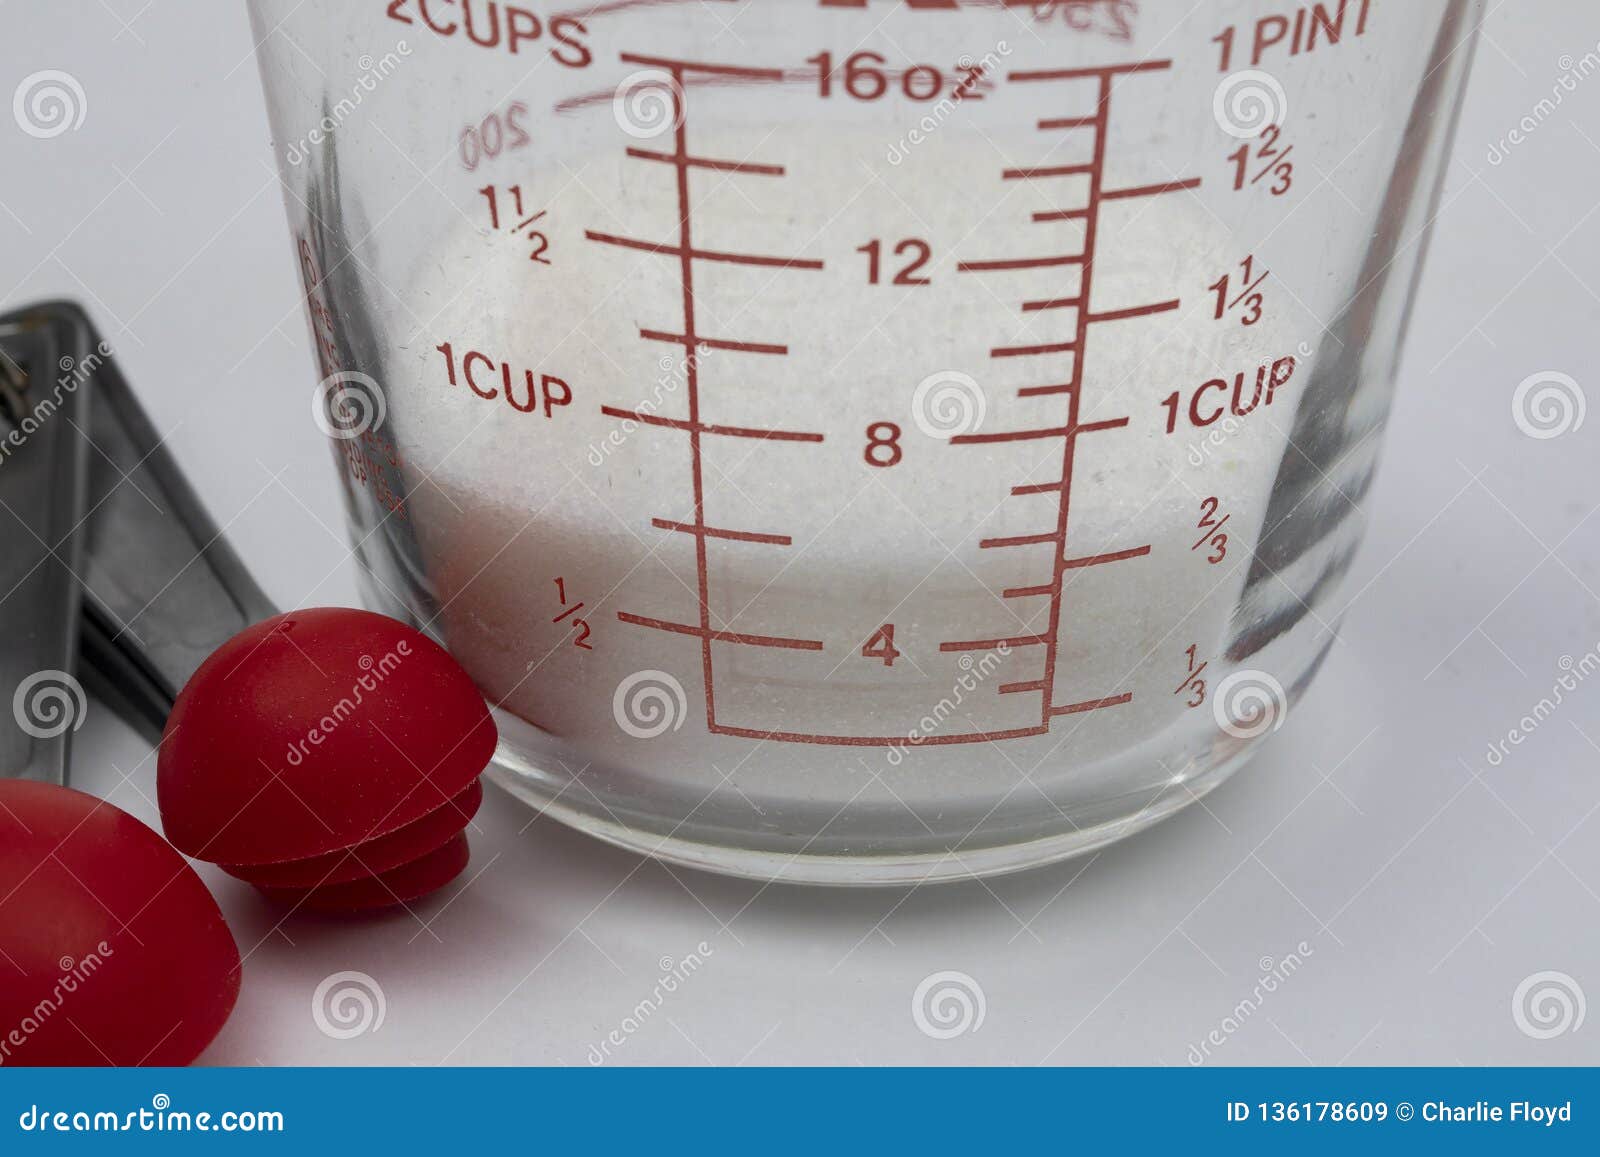 White sugar cubes in a measuring cup - Stock Image - C047/8141